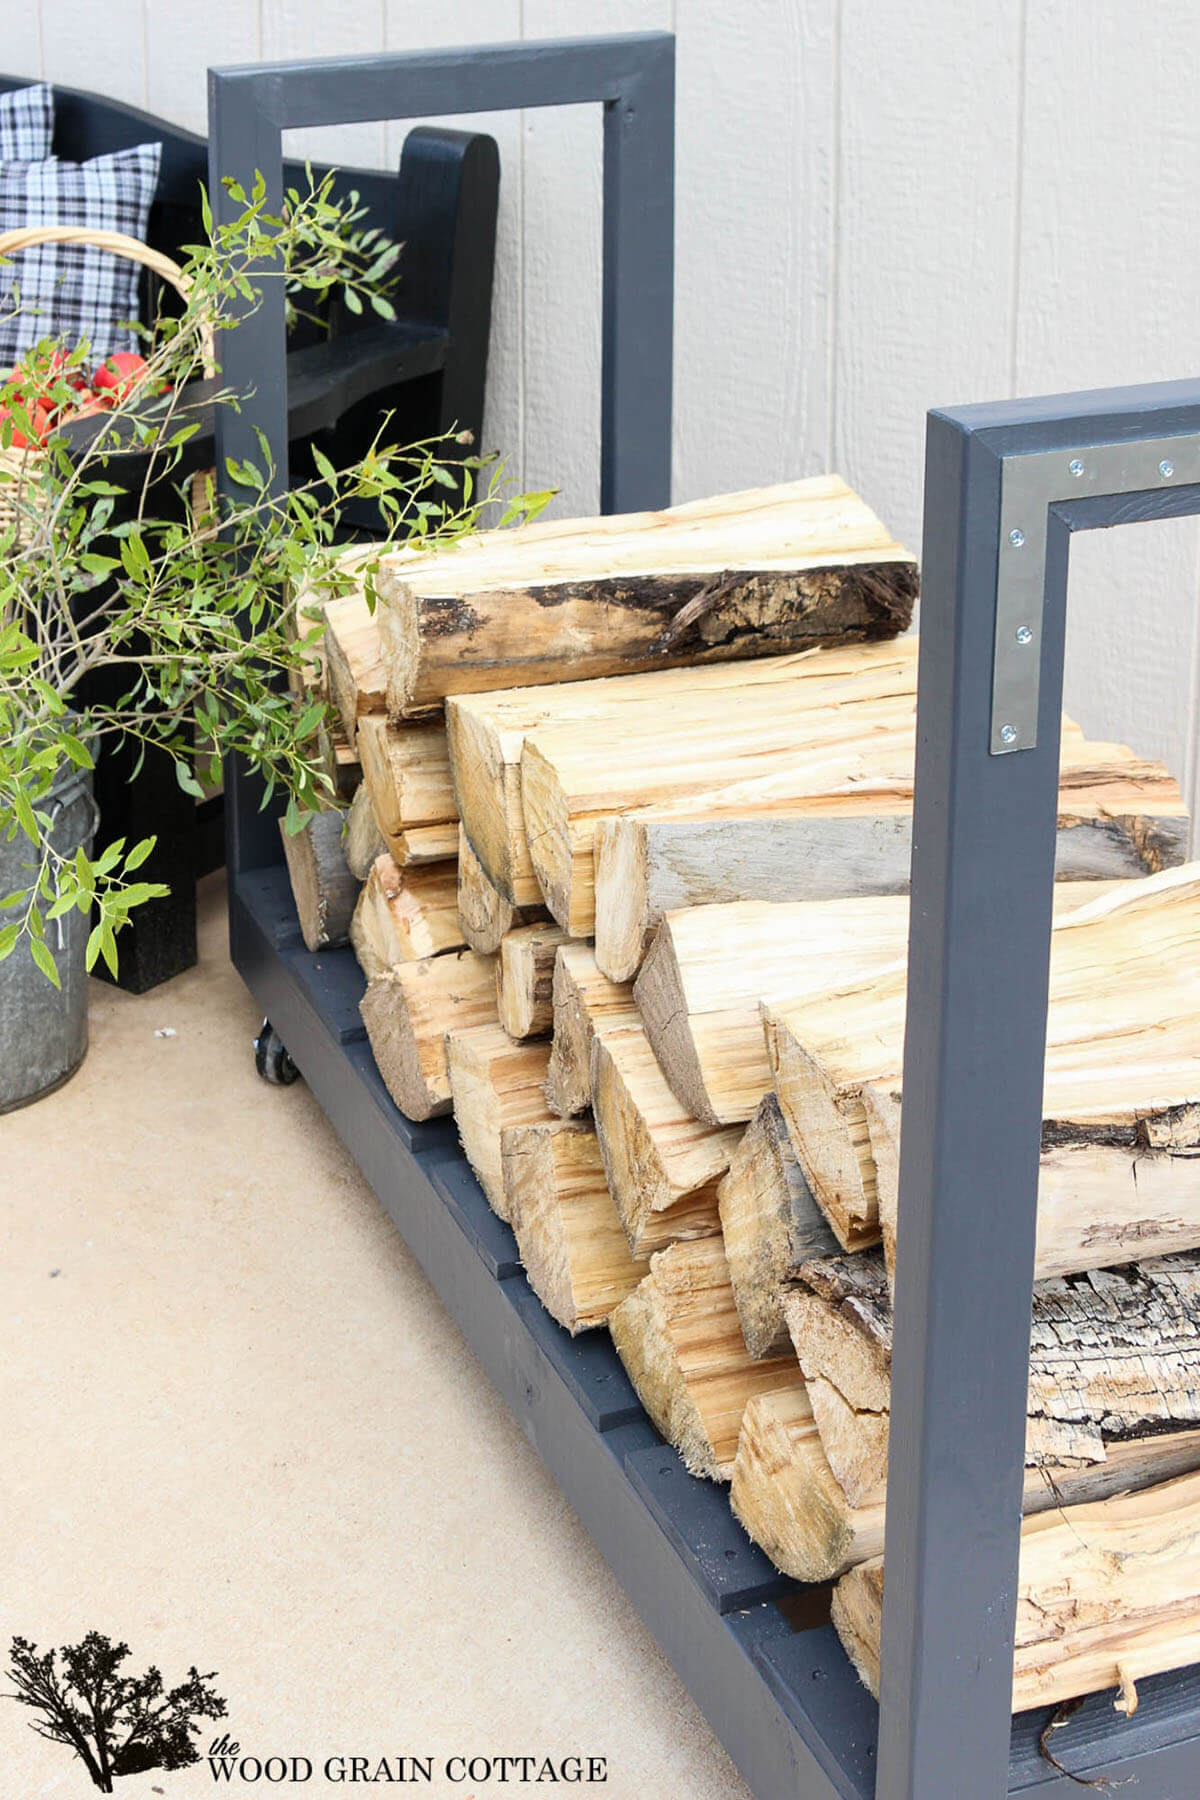 A Movable Firewood Cart for the Outdoors